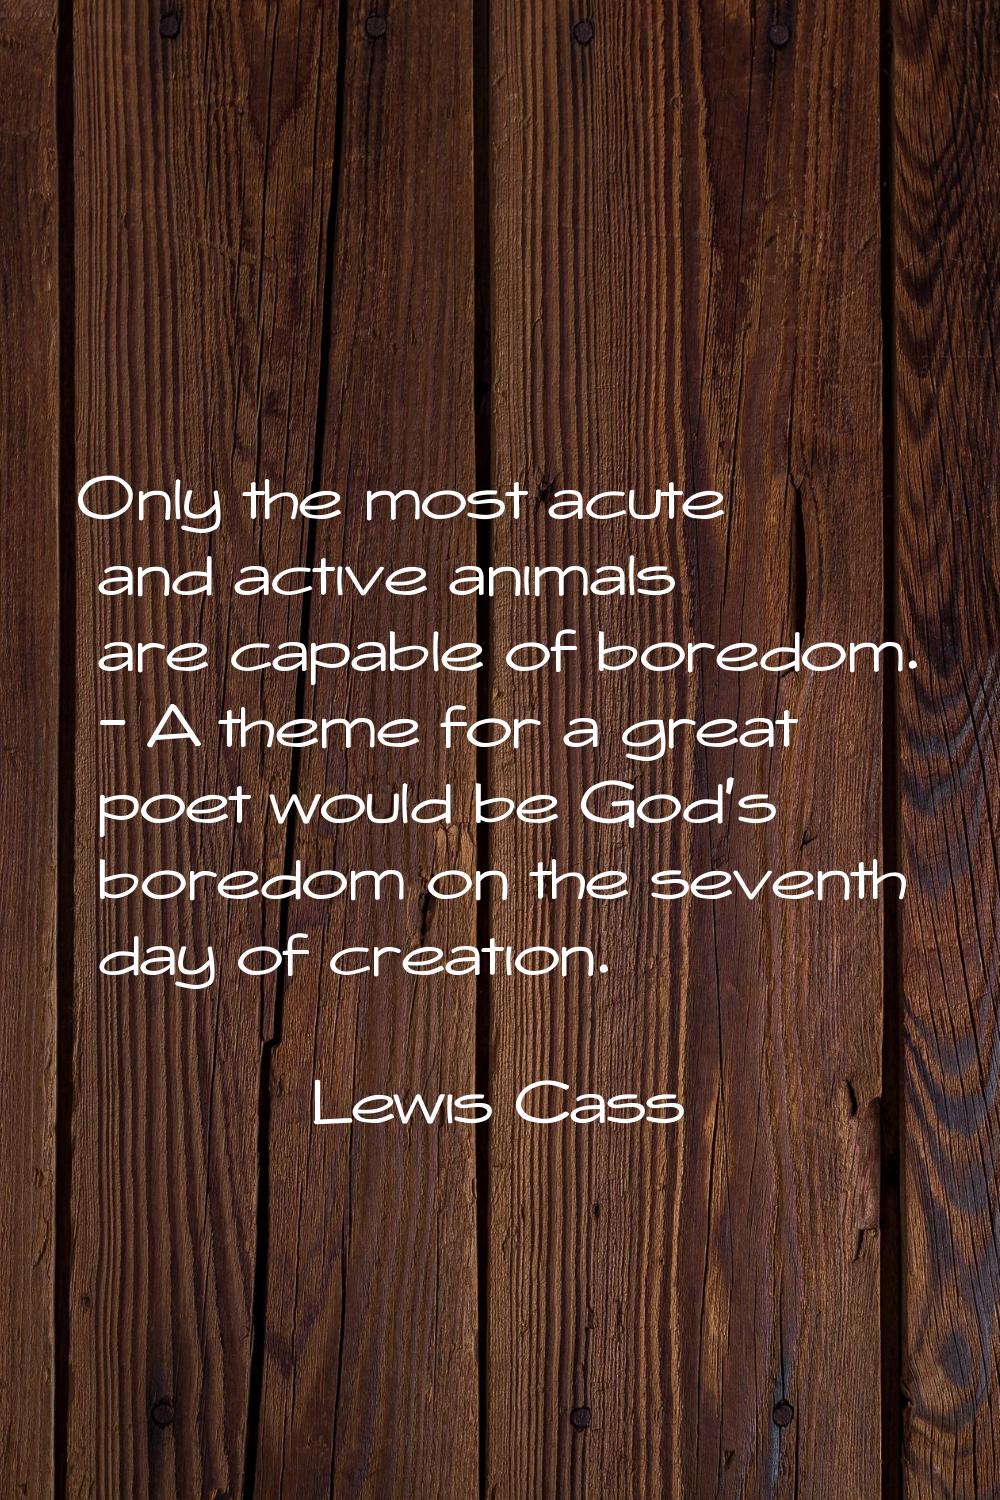 Only the most acute and active animals are capable of boredom. - A theme for a great poet would be 